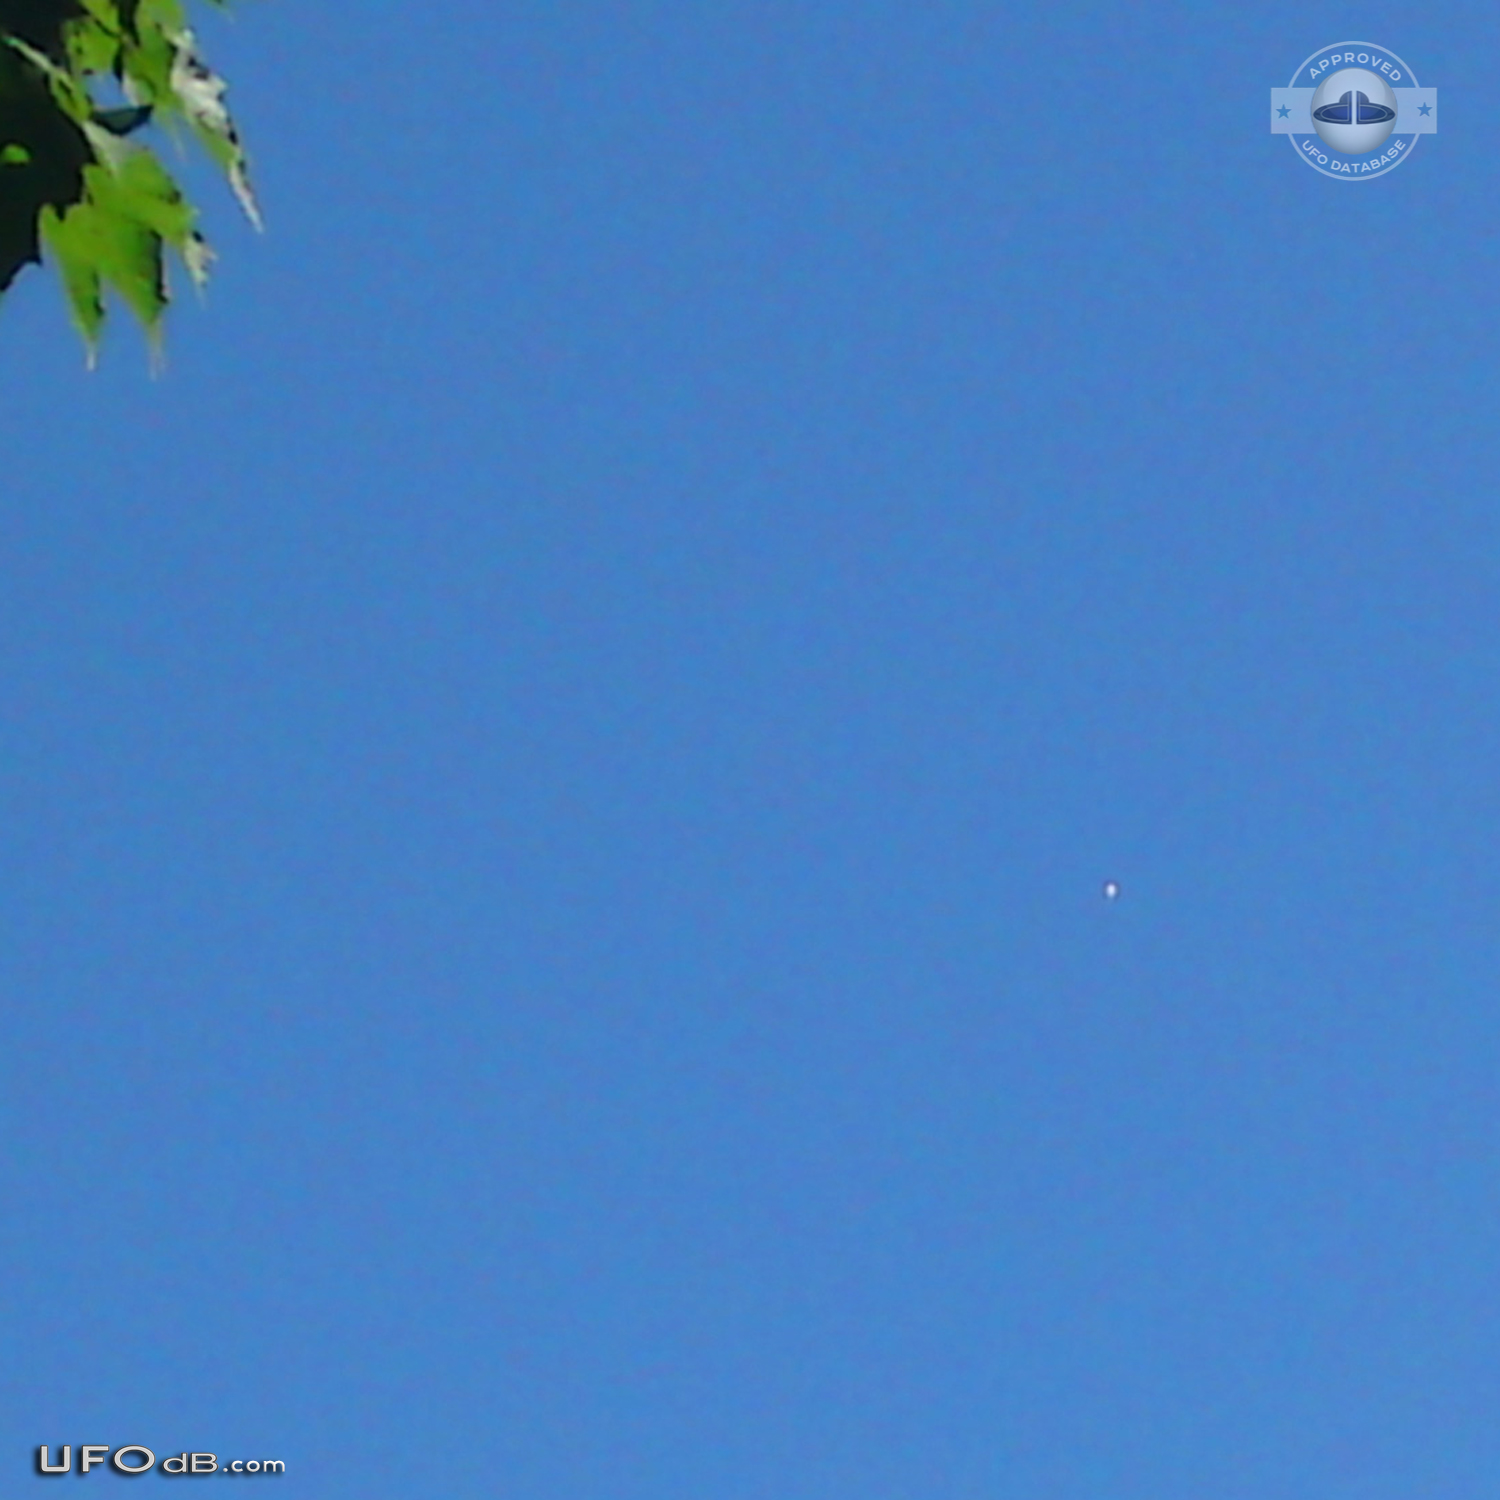 Daytime Spherical UFO UK East London, 2010-07-09, Clear Weather UFO Picture #540-2